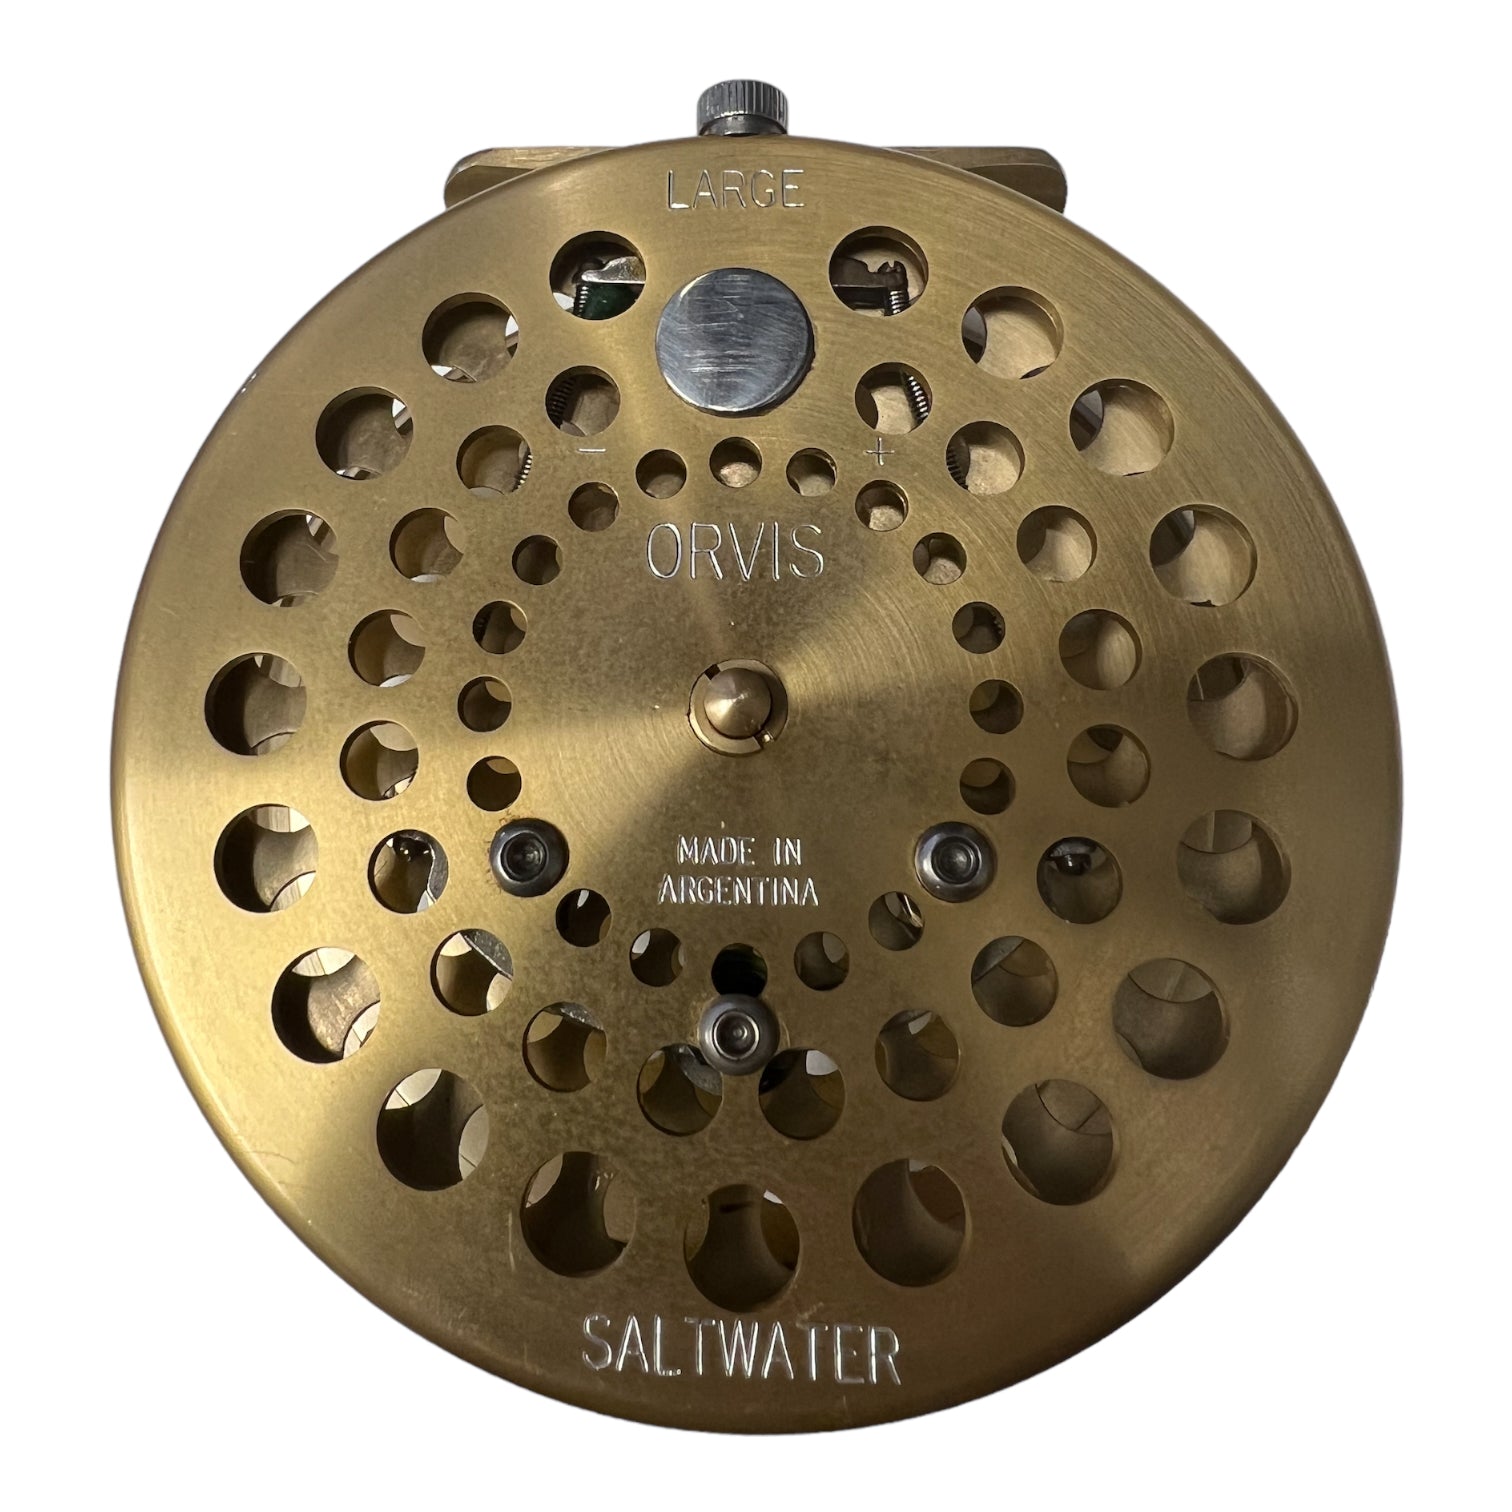 ORVIS CFO IV Disc Saltwater Fly Fishing Reel w/New Case. Made In England.  $195.00 - PicClick